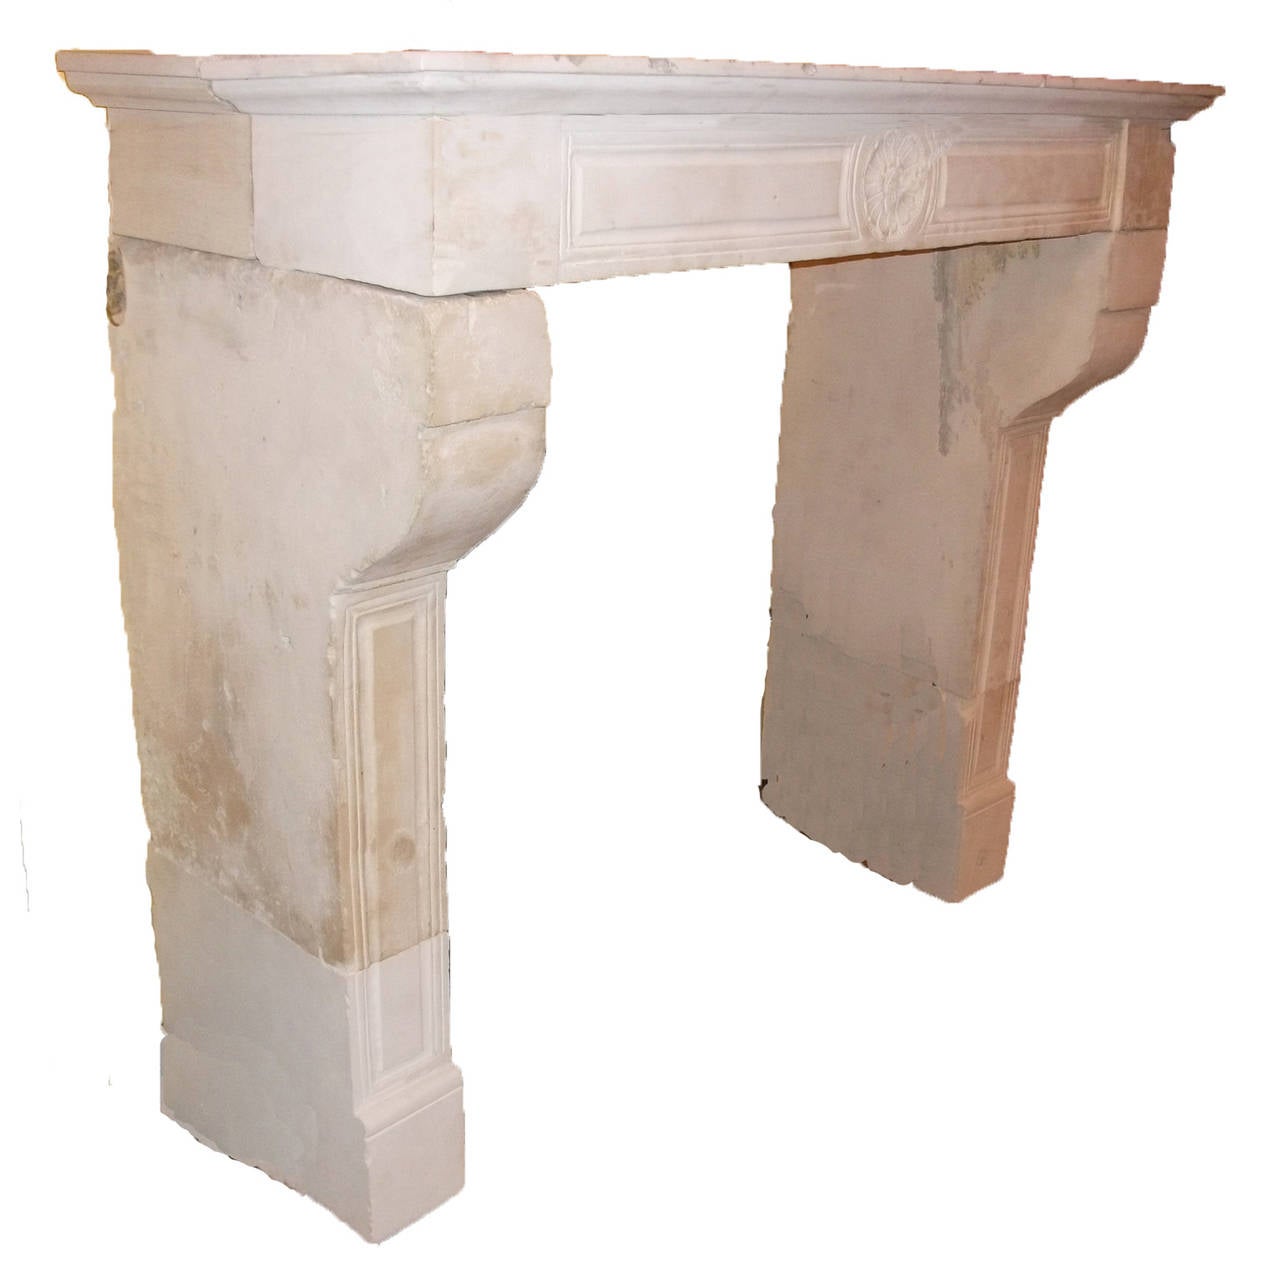 Antique French Limestone fireplace. This LOUIS XVI style fireplace is handcrafted in limestone. This limestone fireplace is in great condition and from the 18th century. Carved details on mantel and legs. Legs also have a curved accent close to